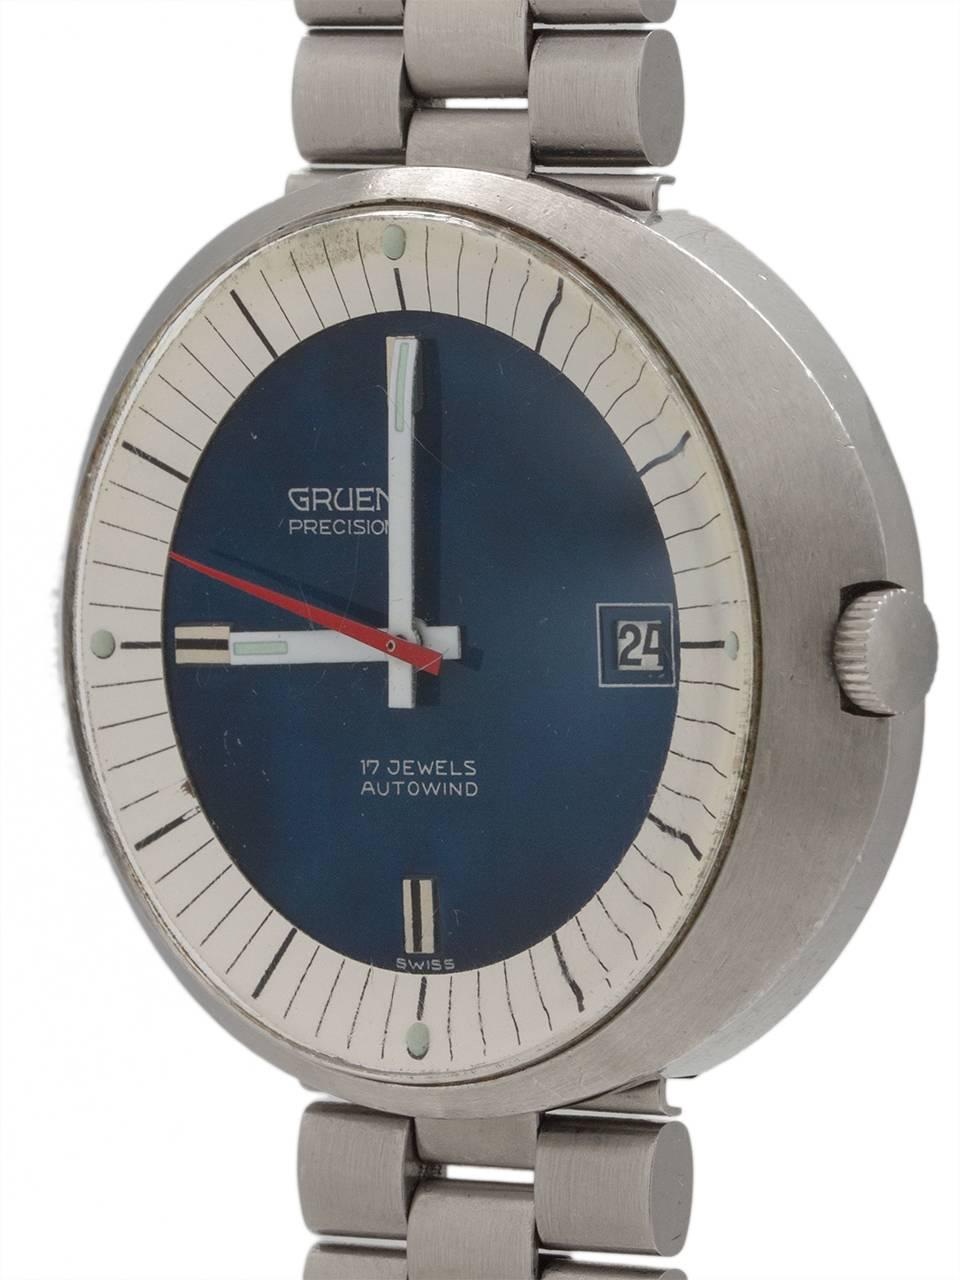 Super cool, and mint, thick saucer shaped Gruen automatic wristwatch circa 1970. Featuring 38x43mm disk shaped case (think Ikepod or Tissot) with recessed crown, wonderful bull’s eye dial with darkblue center, outer white track with black indexes